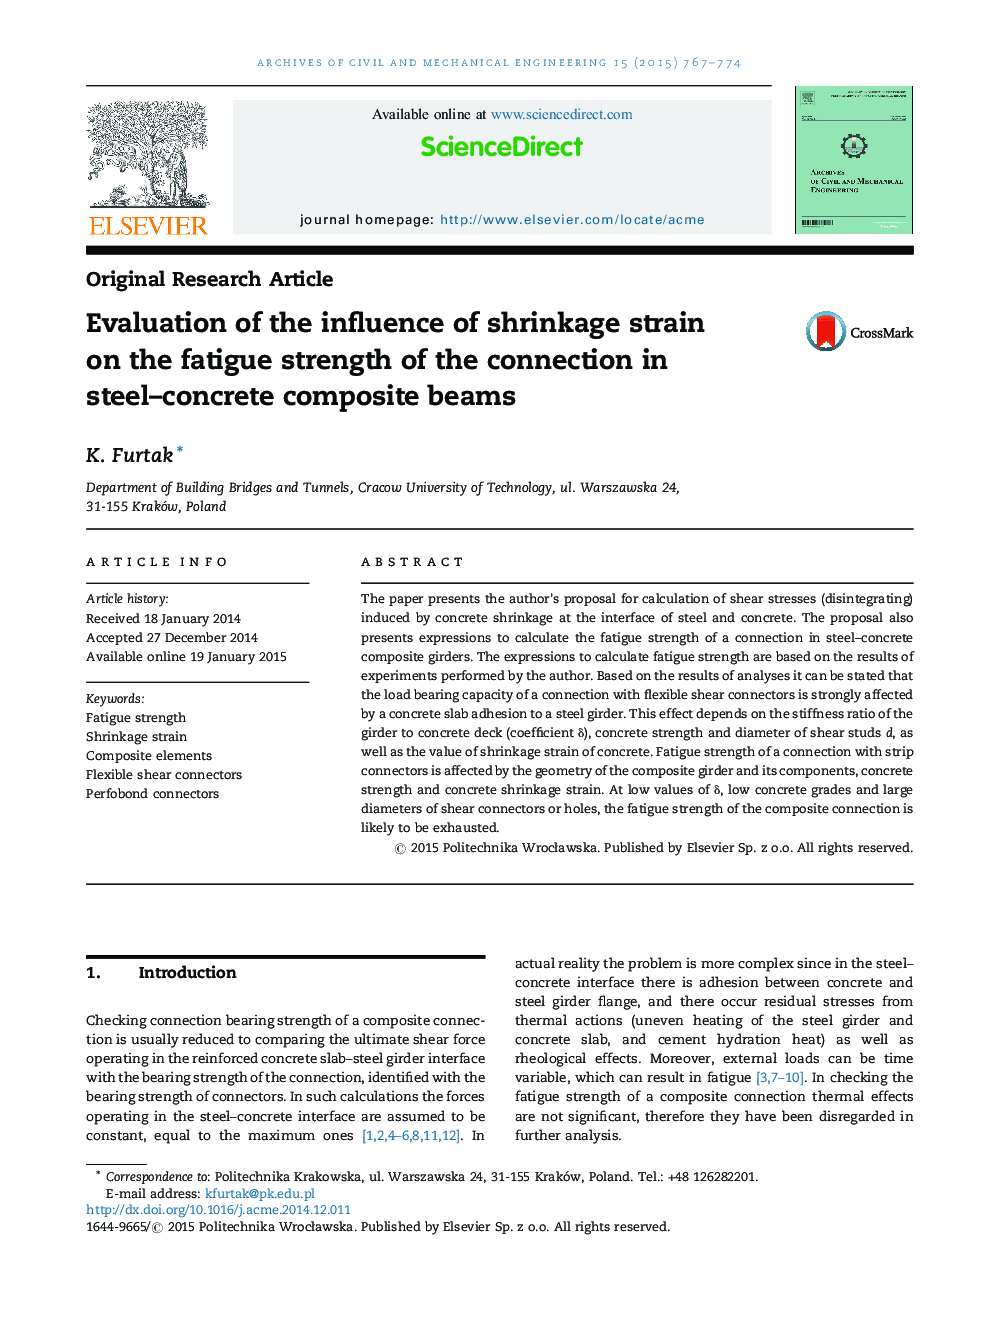 Evaluation of the influence of shrinkage strain on the fatigue strength of the connection in steel–concrete composite beams